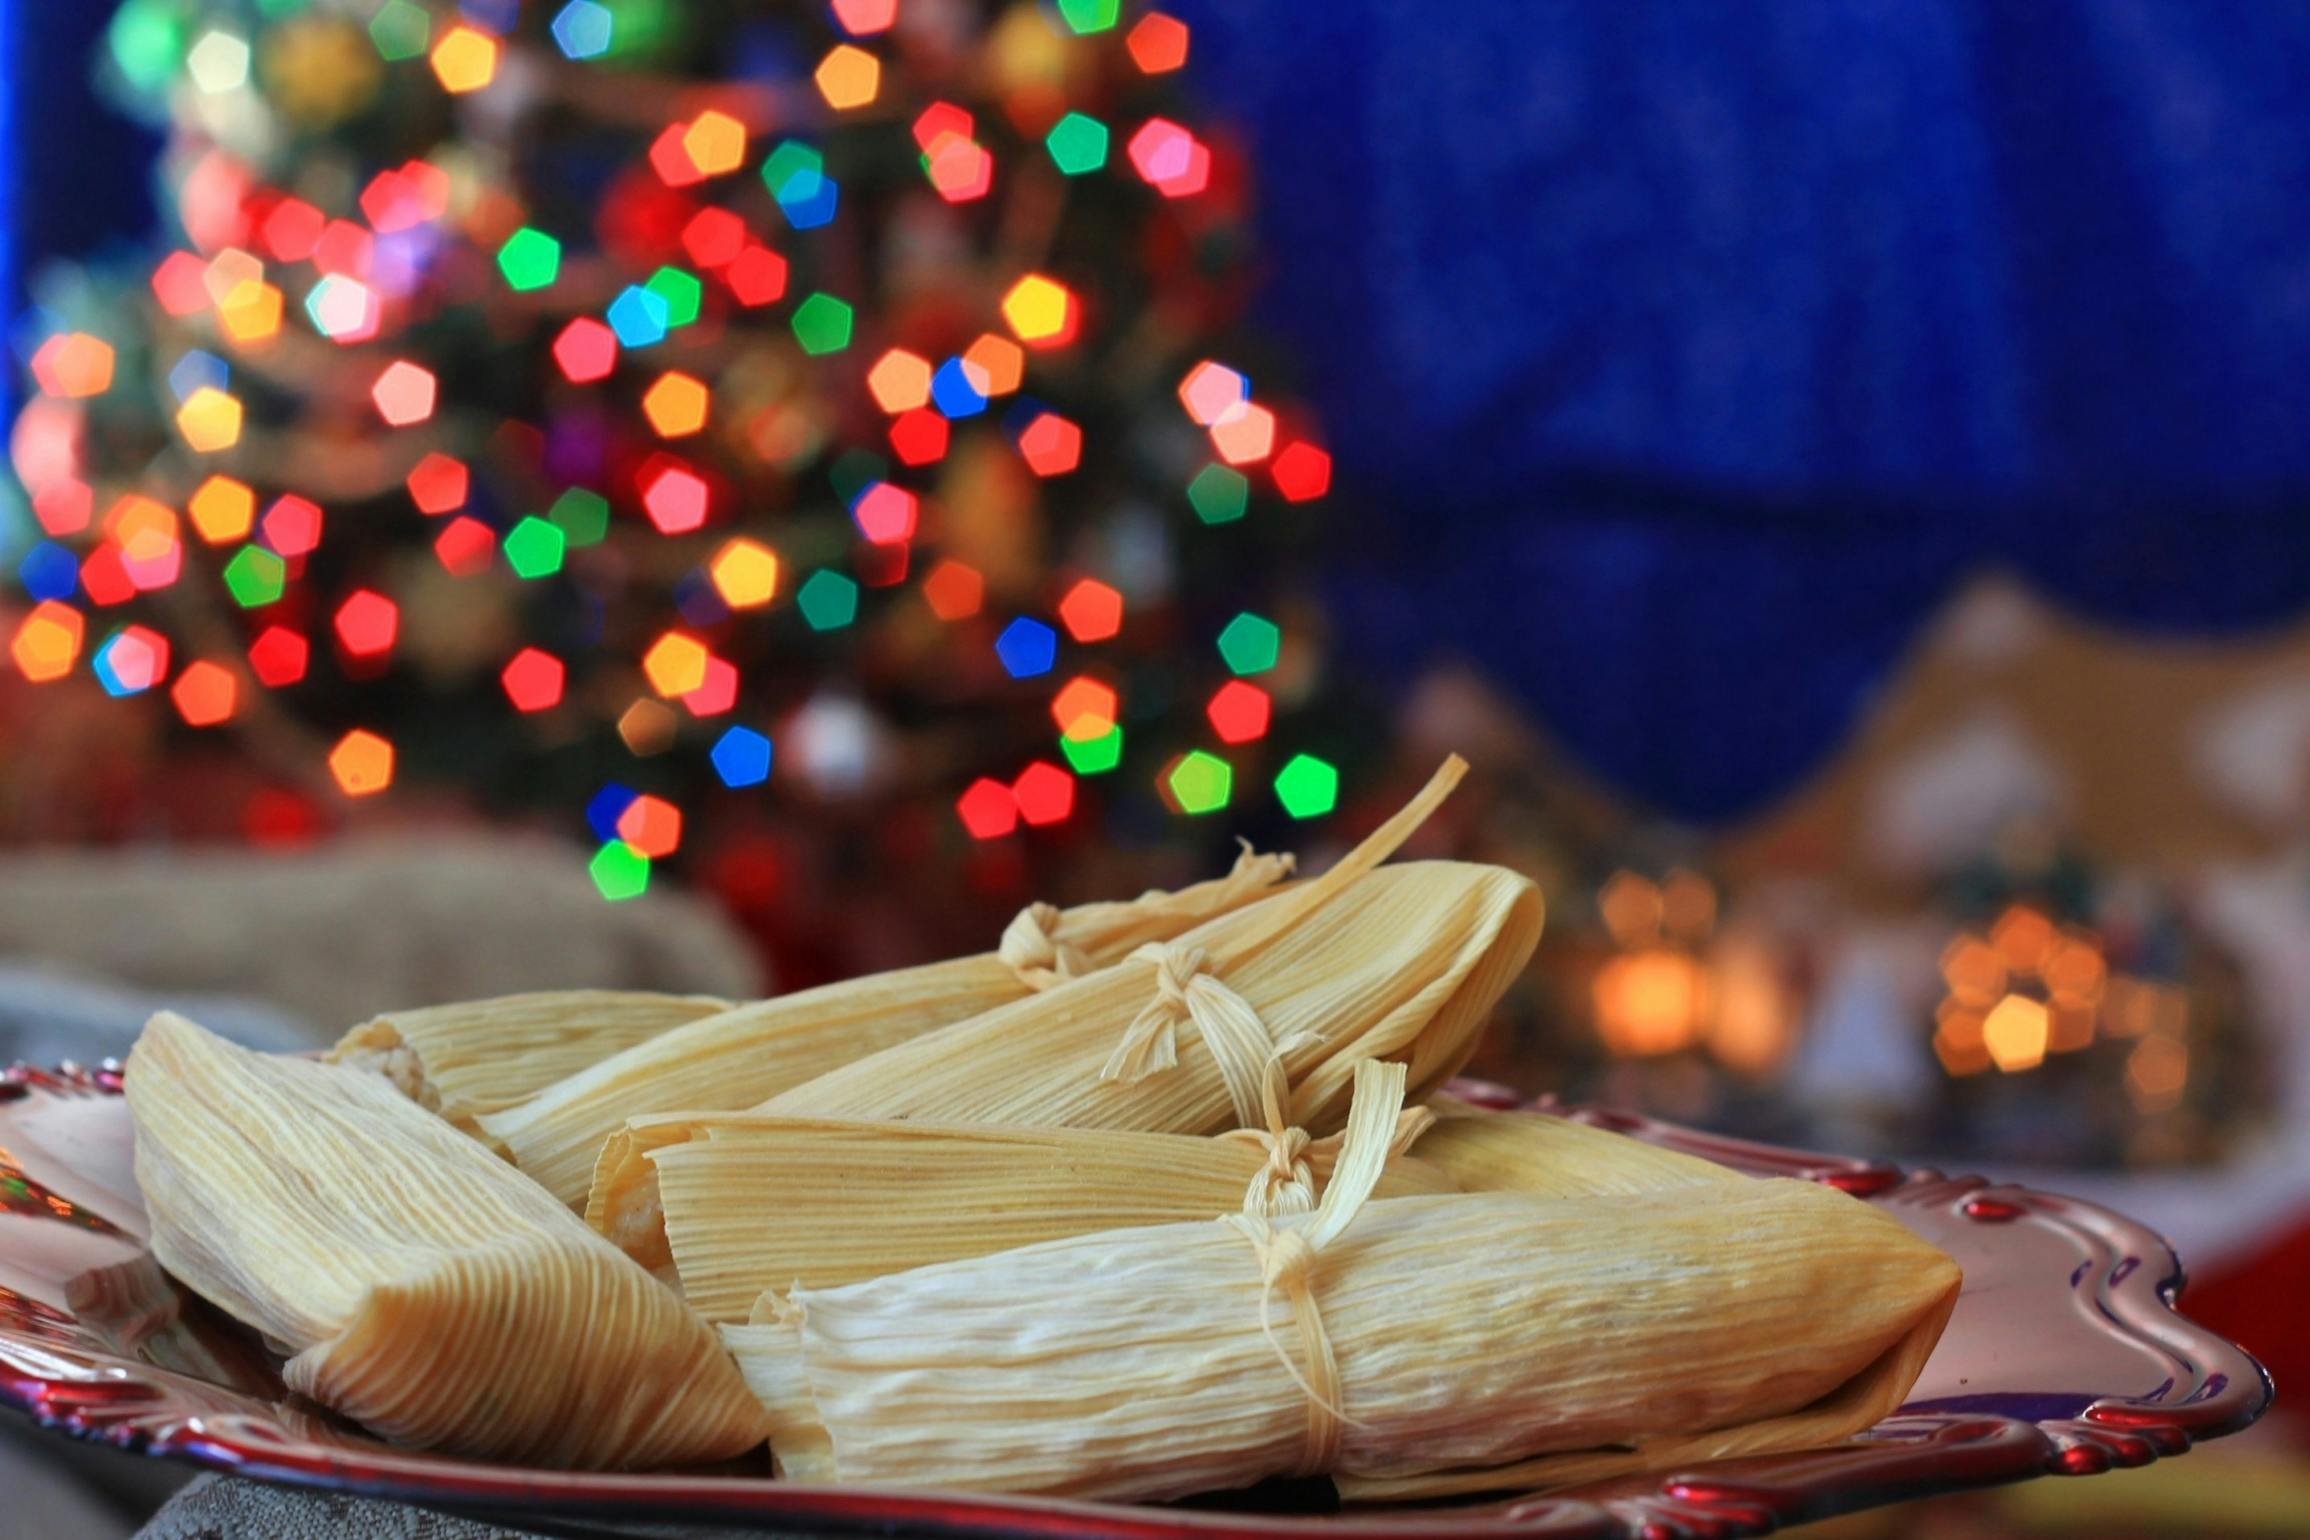 A plate of homemade tamales in front of a Christmas tree